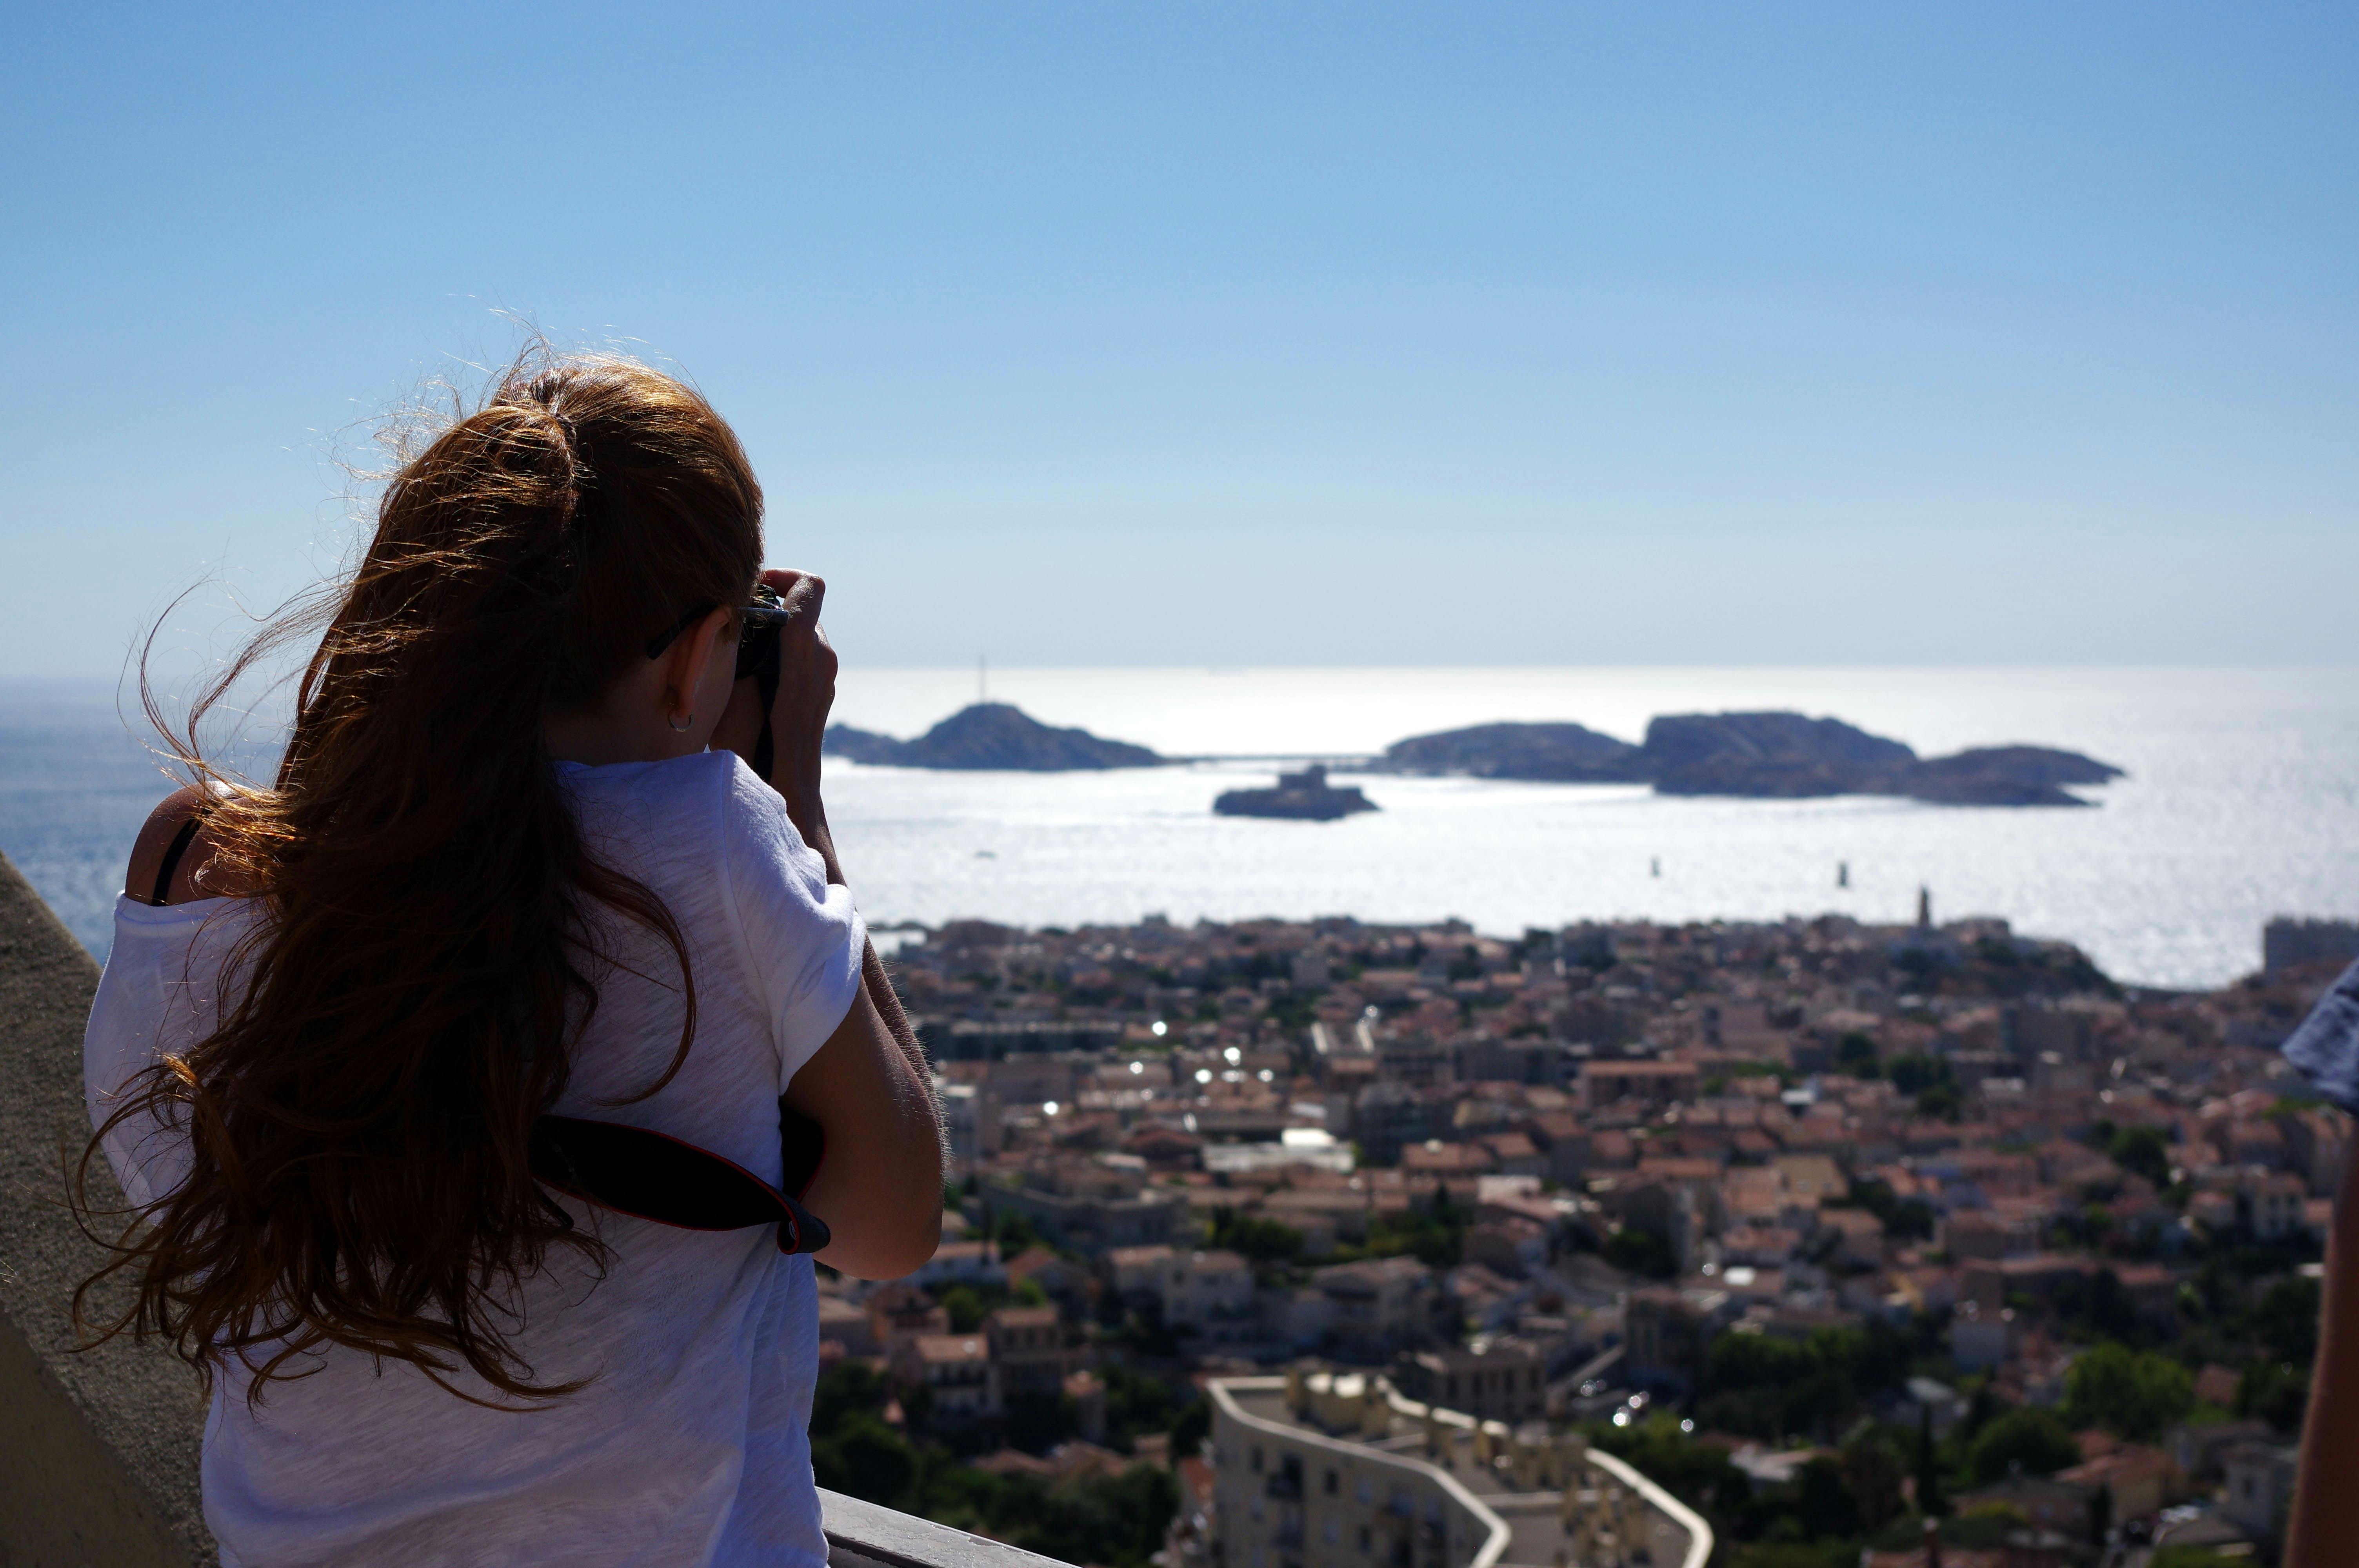 Boost your photography skills and tour Marseille in a creative way guided by